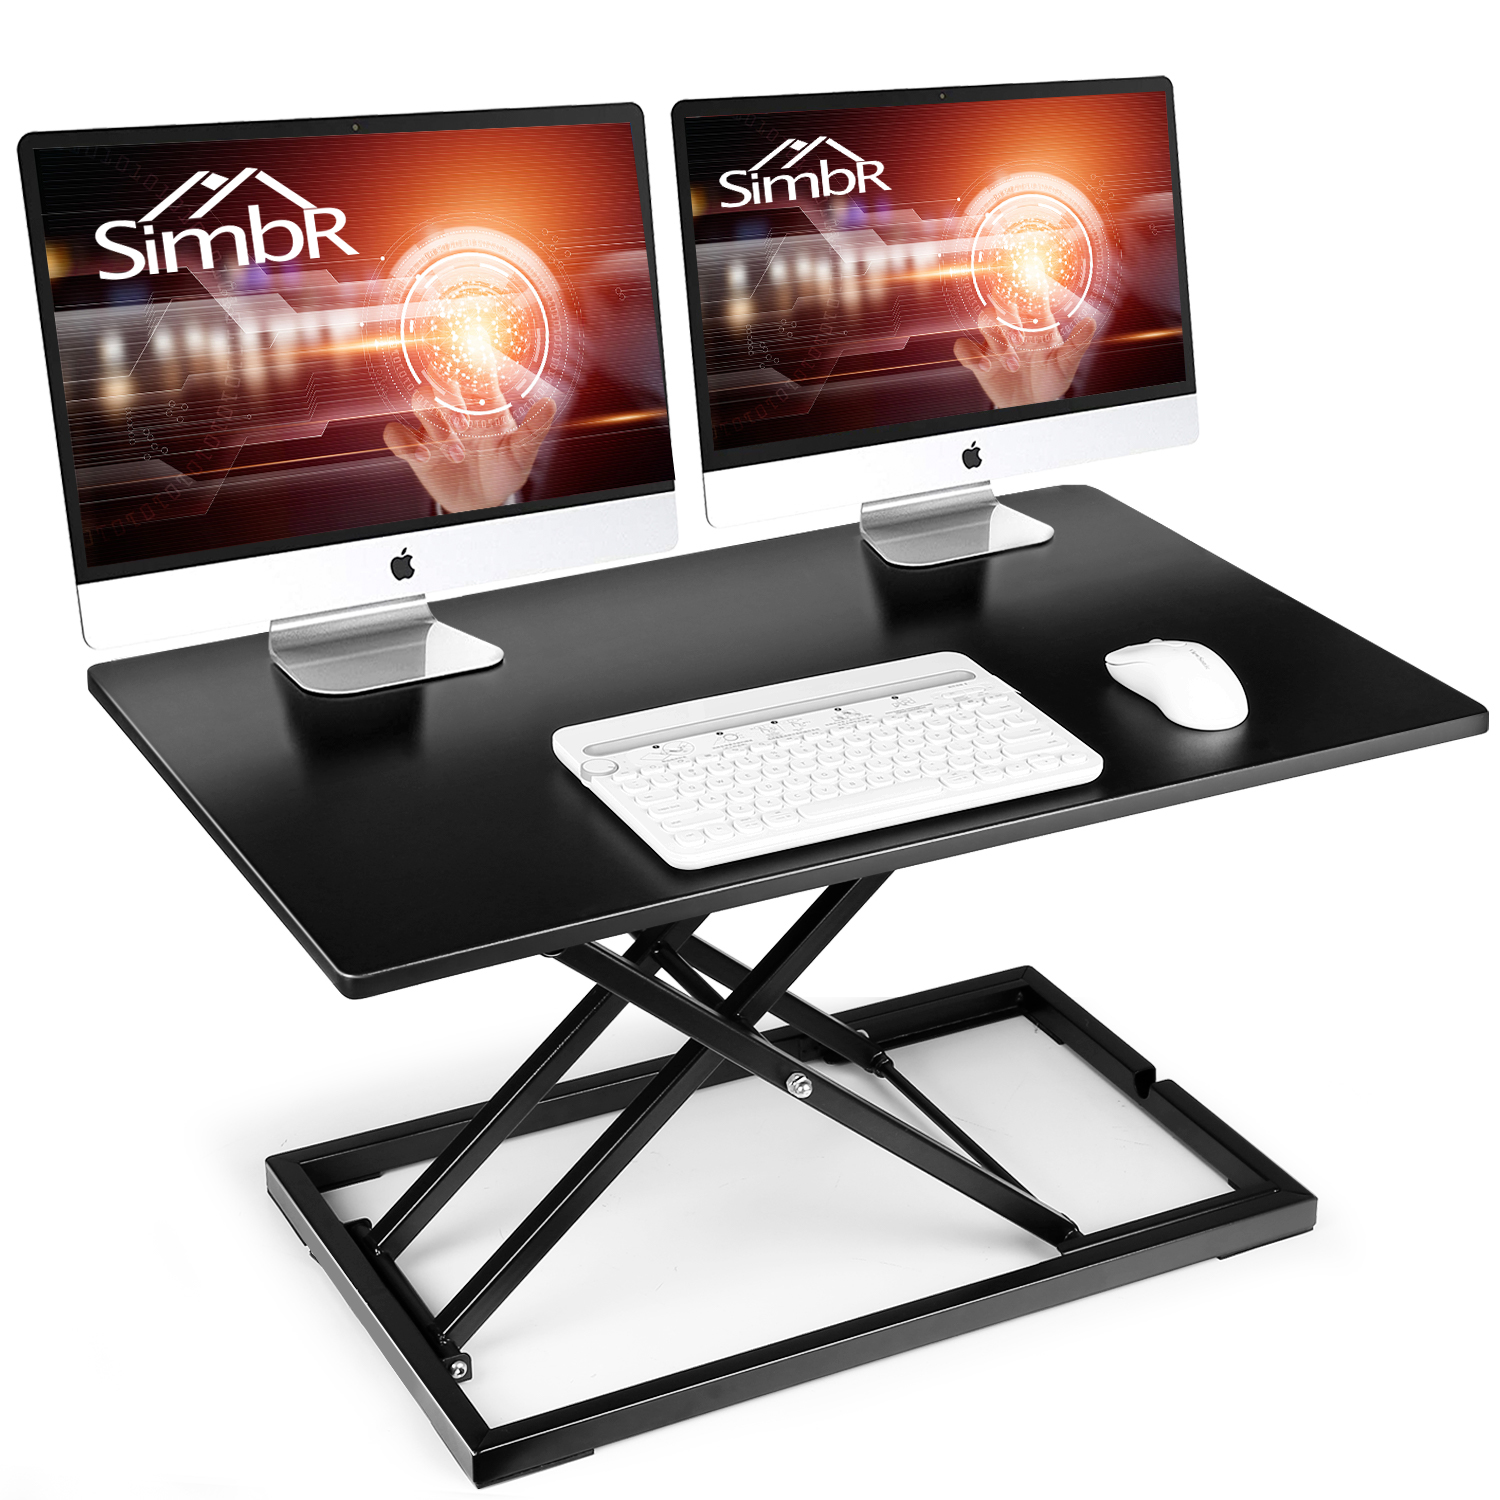 SIMBR Standing Desk Converter 32 inch, Height Adjustable Sit to